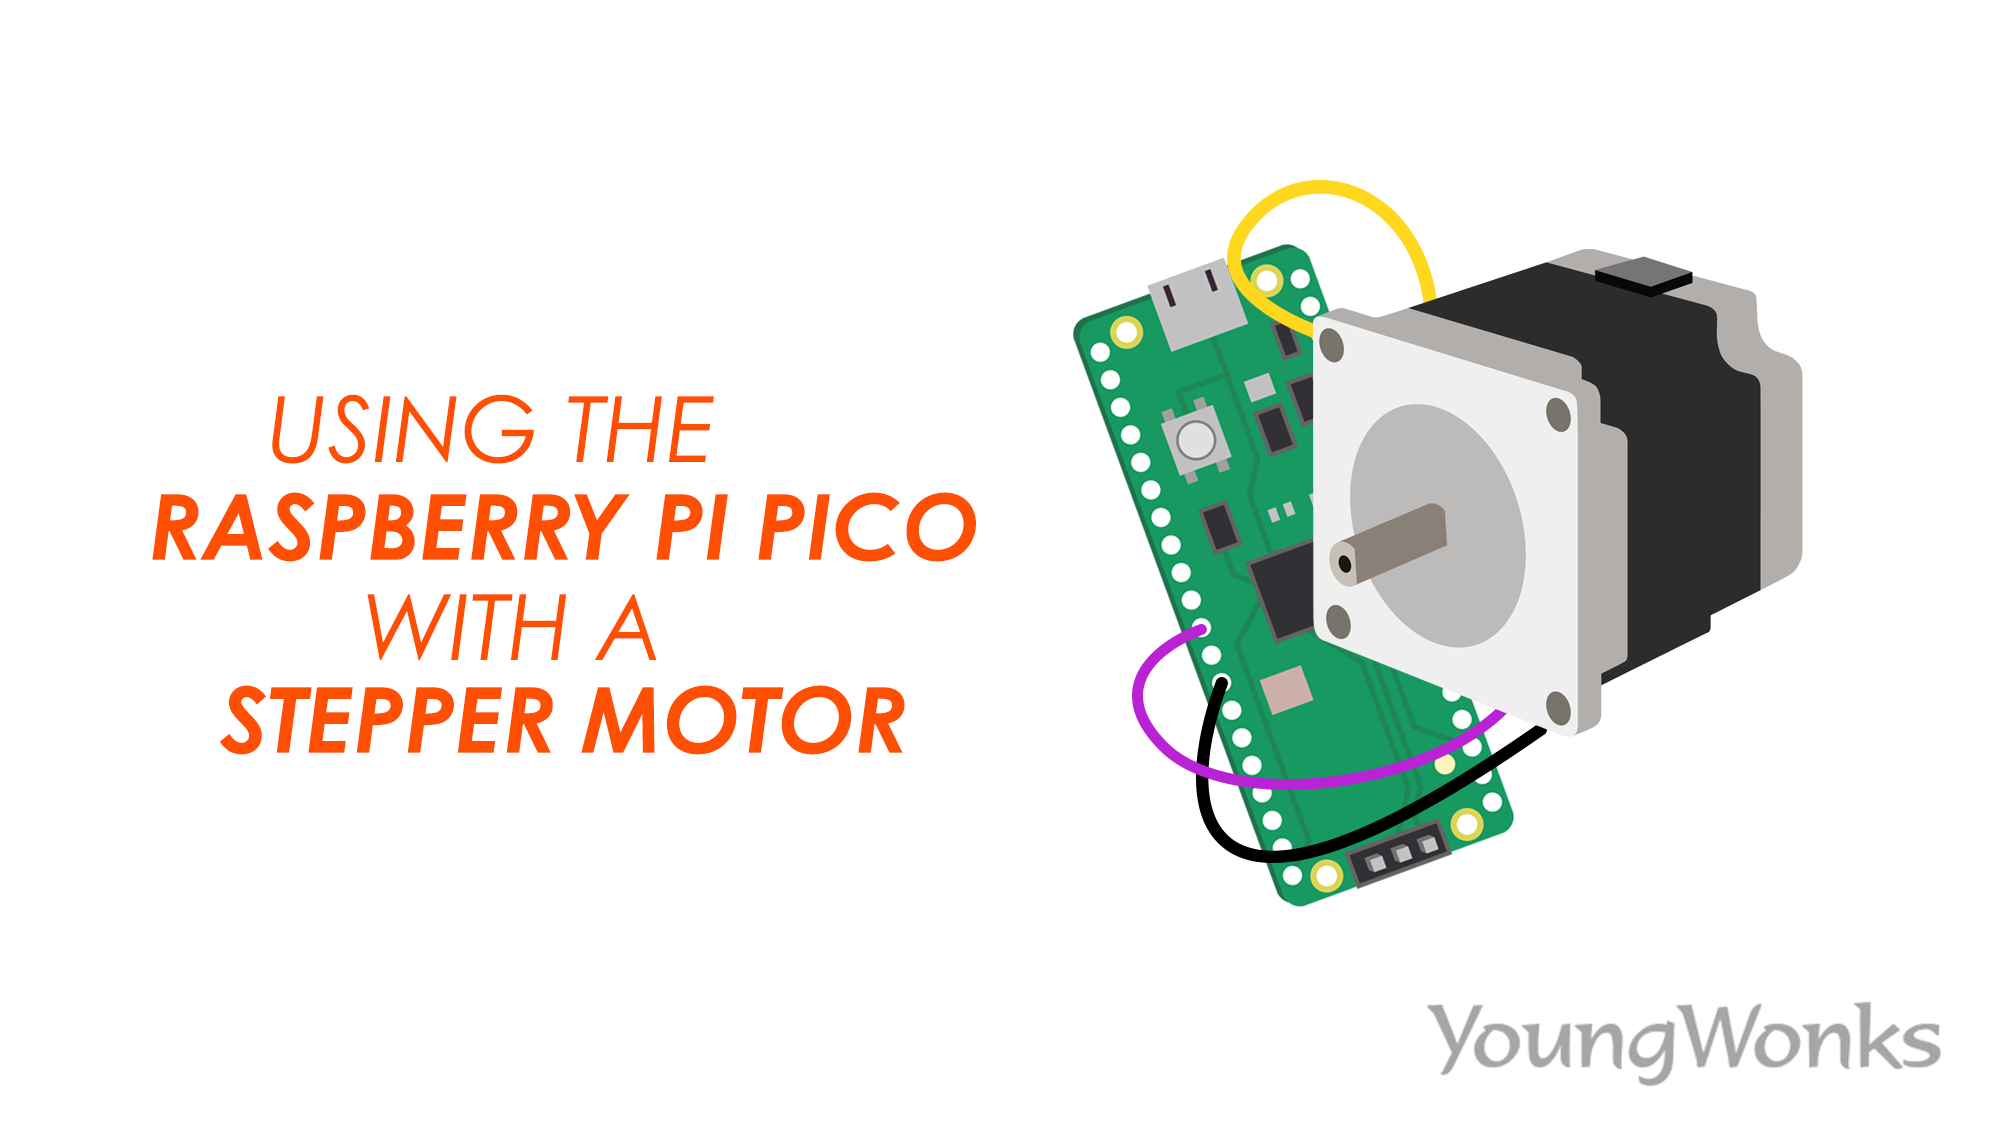 How to use a stepper motor with the Raspberry Pi Pico